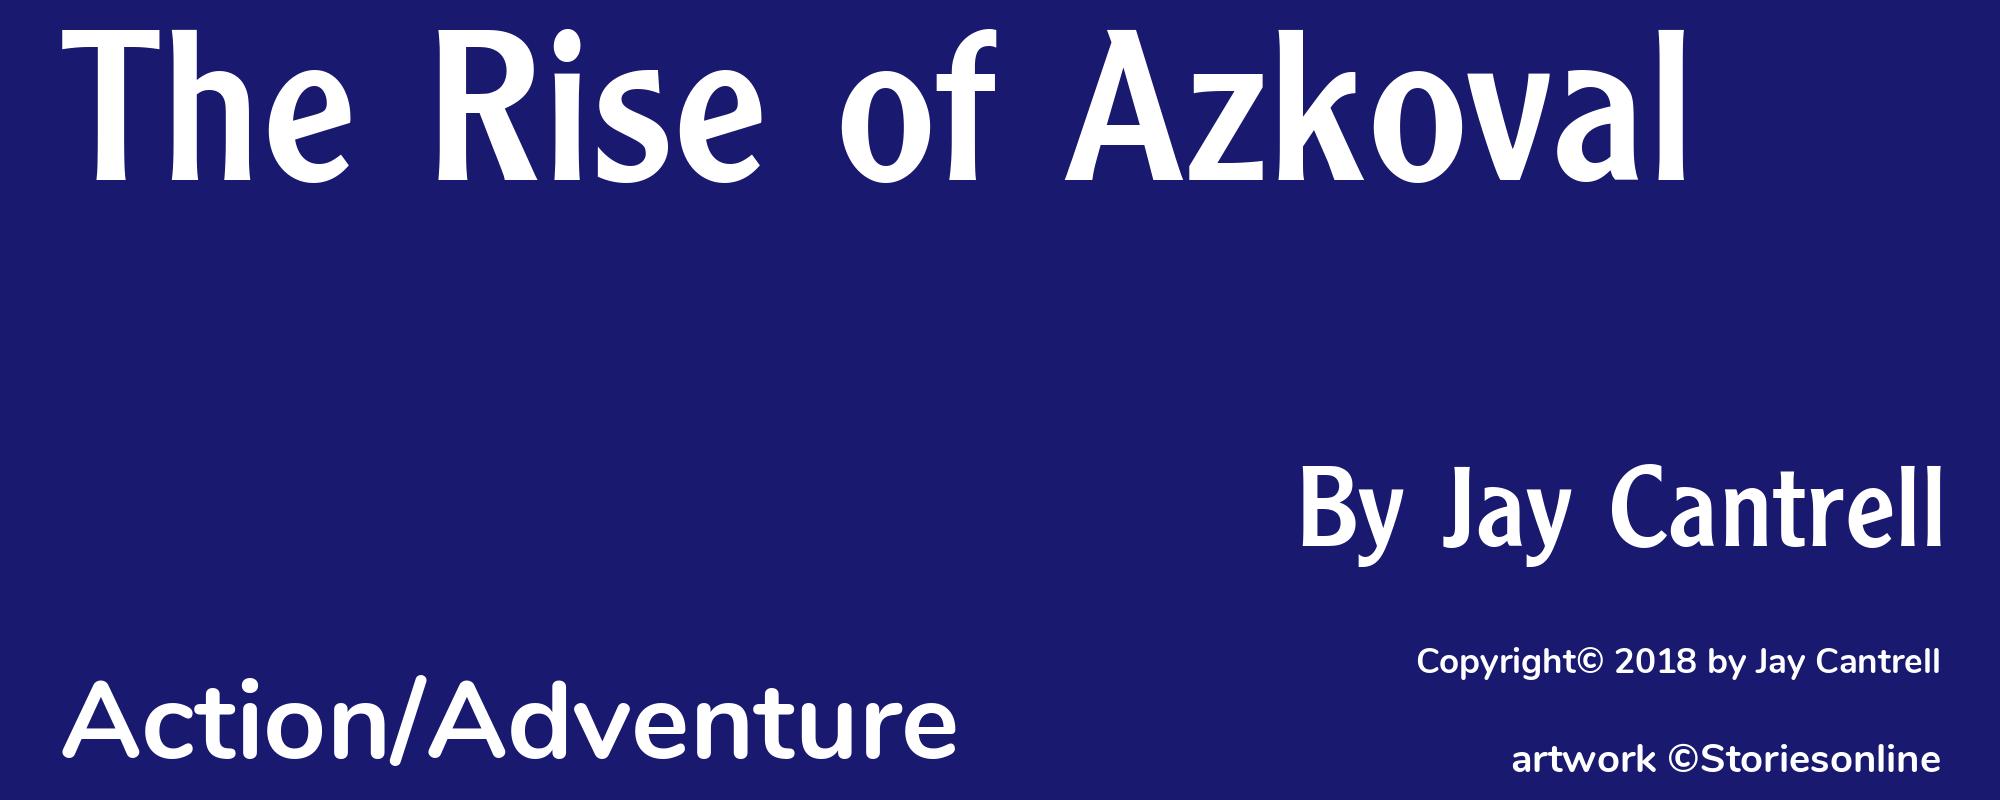 The Rise of Azkoval - Cover